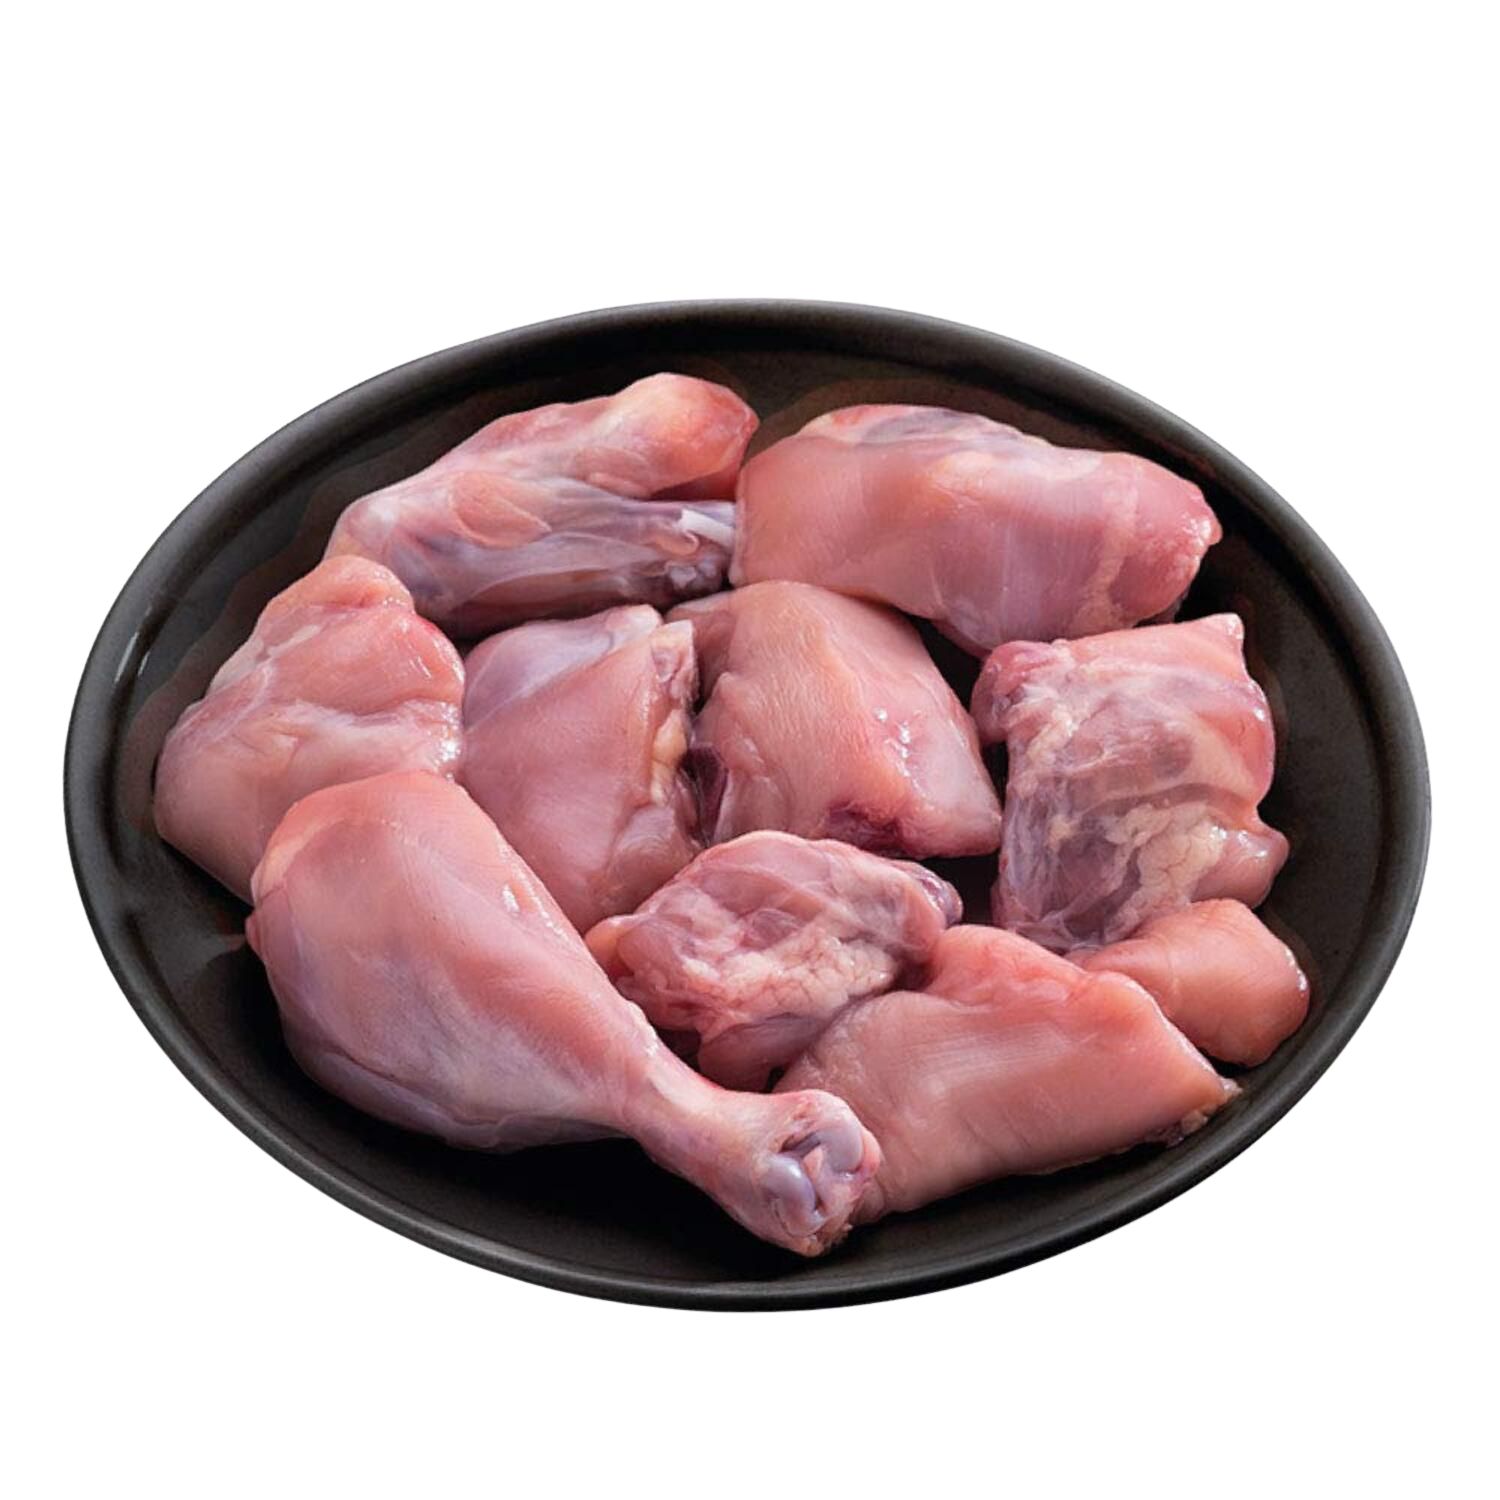 Chicken Curry Cut - Large Pieces,Large Pack